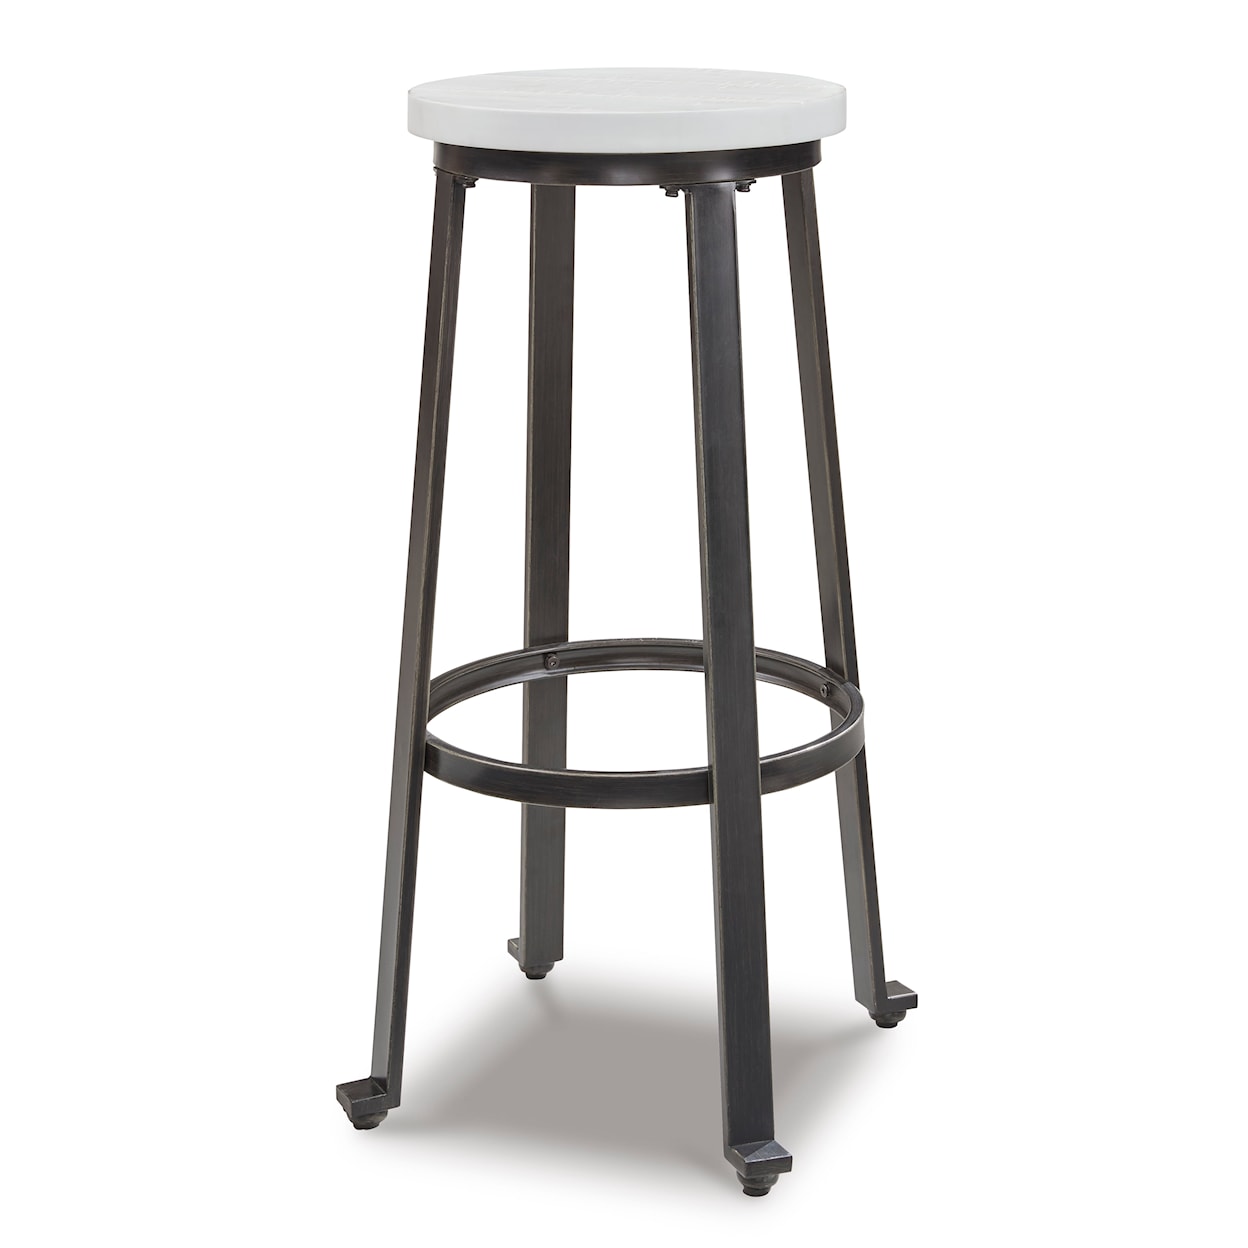 Signature Design by Ashley Furniture Challiman Bar Height Stool